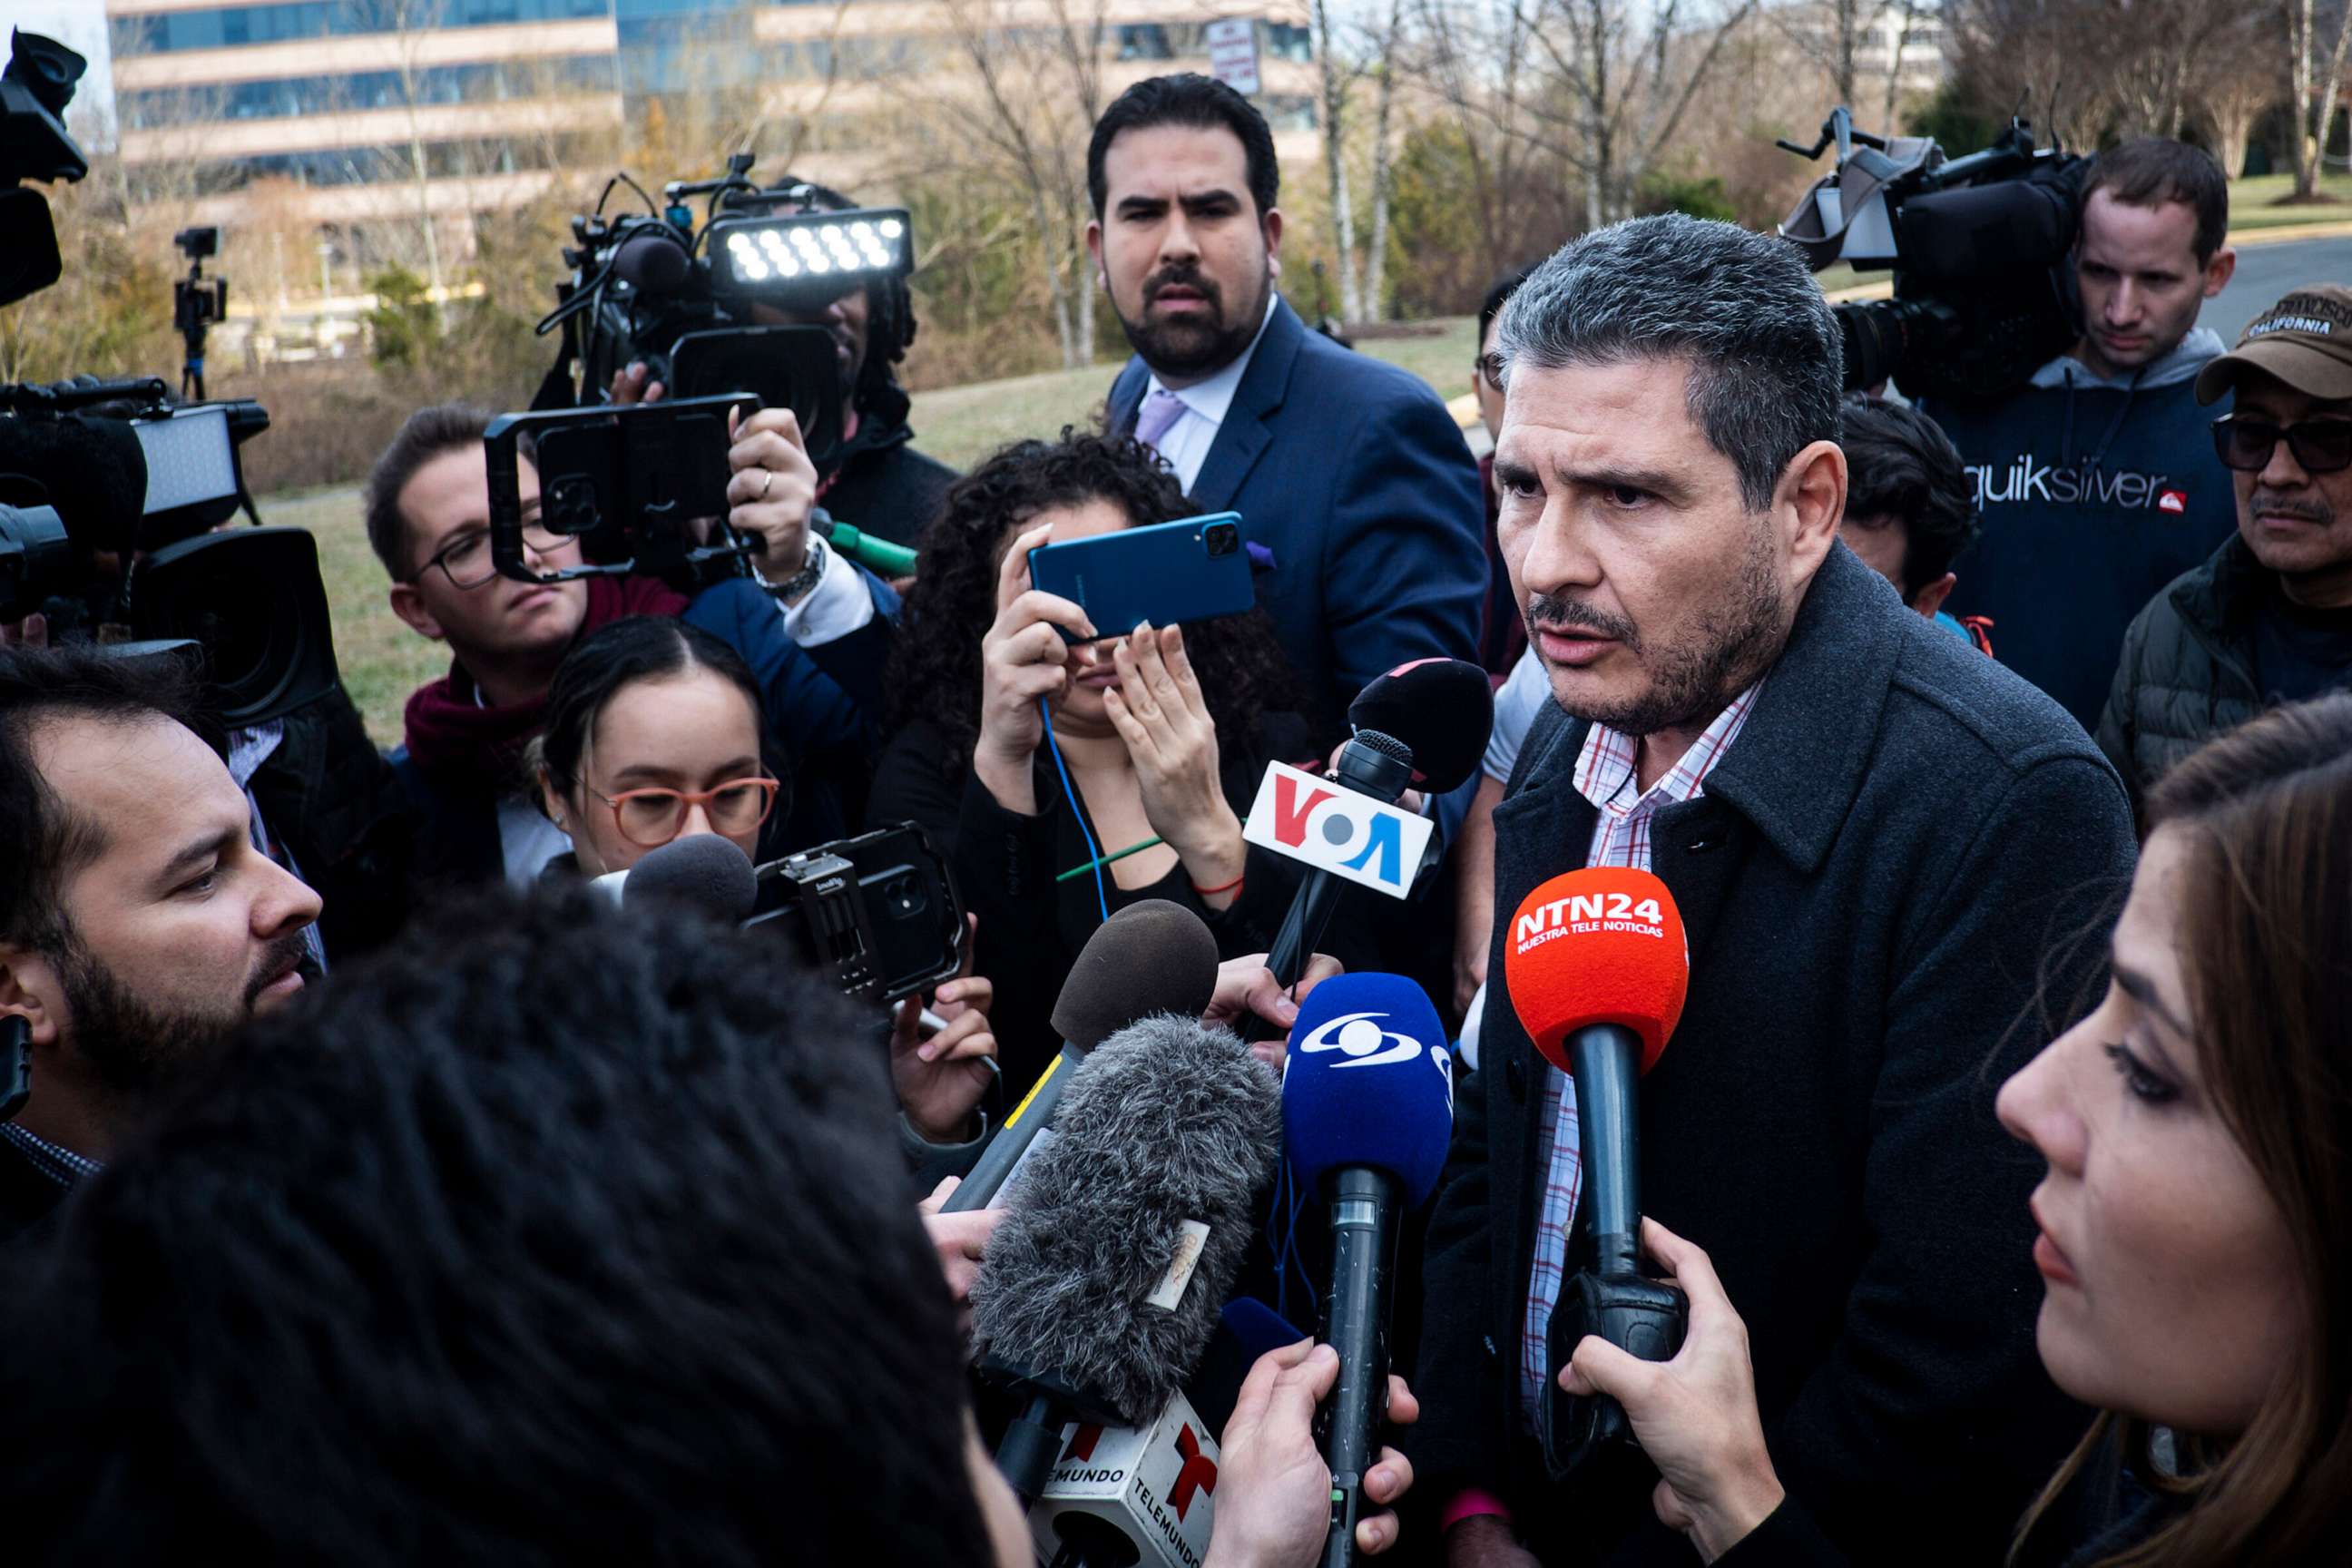 PHOTO: Juan Sebastian Chamorro speaks with reporters after arriving in the United States, in Herndon, Va., Feb. 9, 2023.